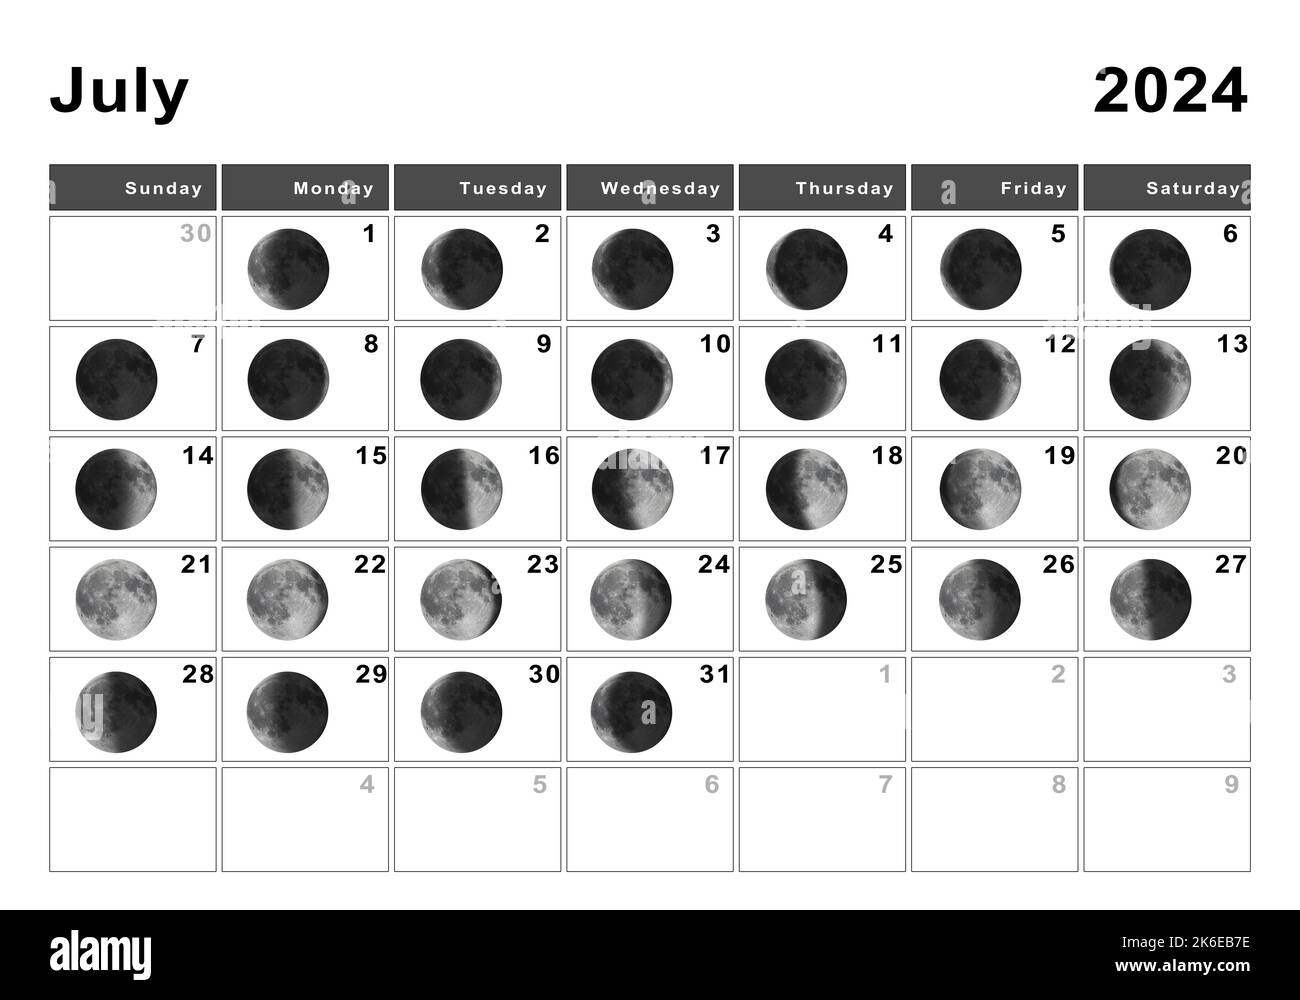 July 2024 Lunar Calendar, Moon Cycles, Moon Phases Stock Photo - Alamy in July Calendar with Moon Phases 2024